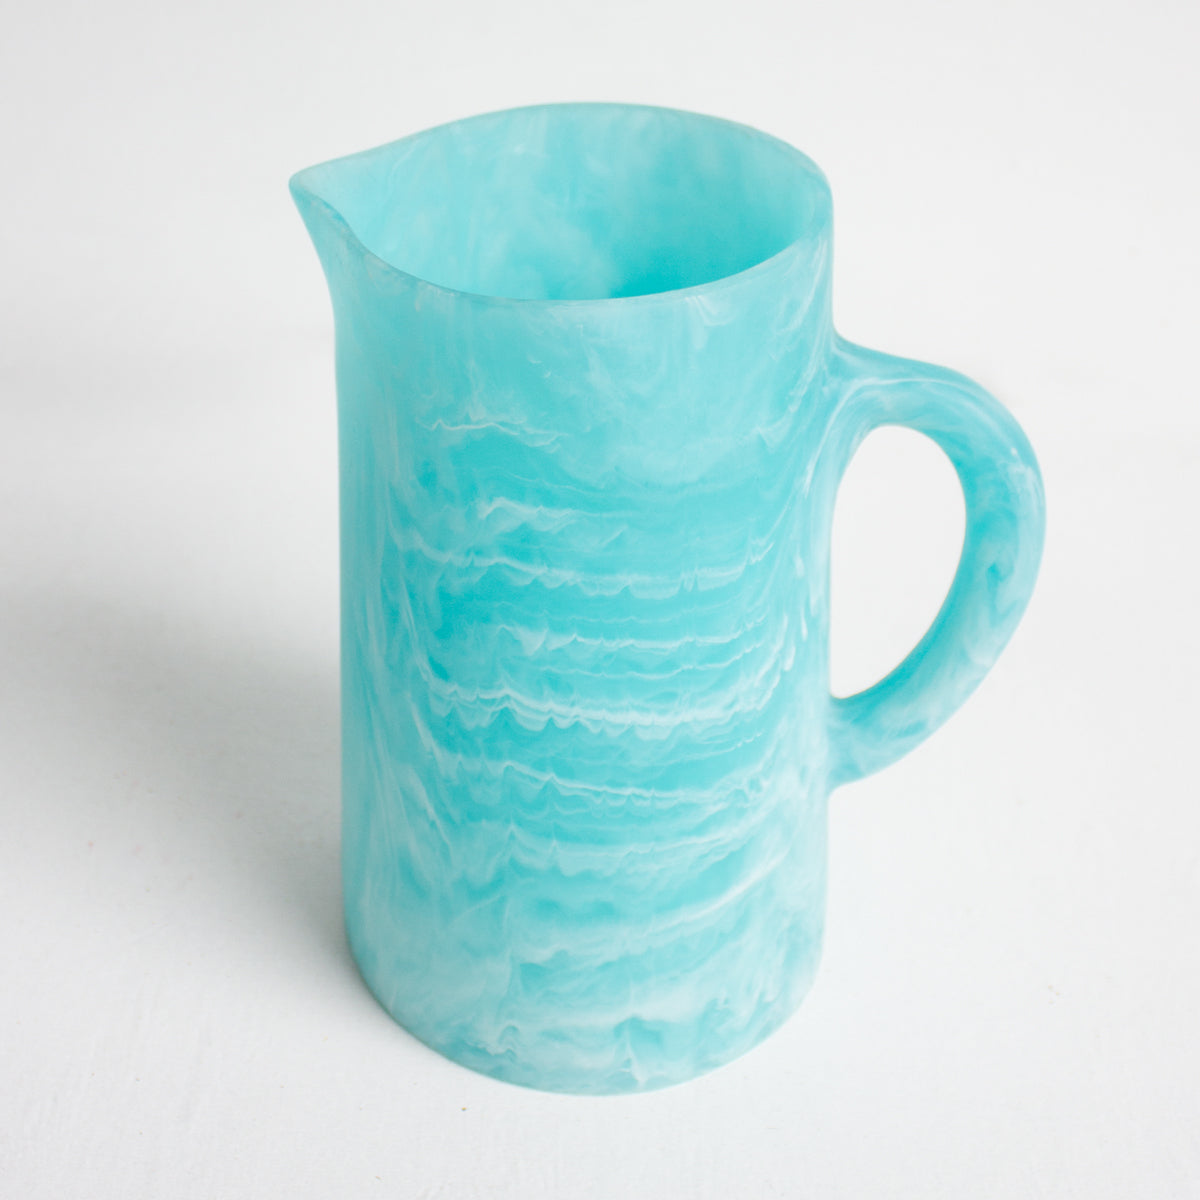 Resin Pitcher - Turquoise Blue